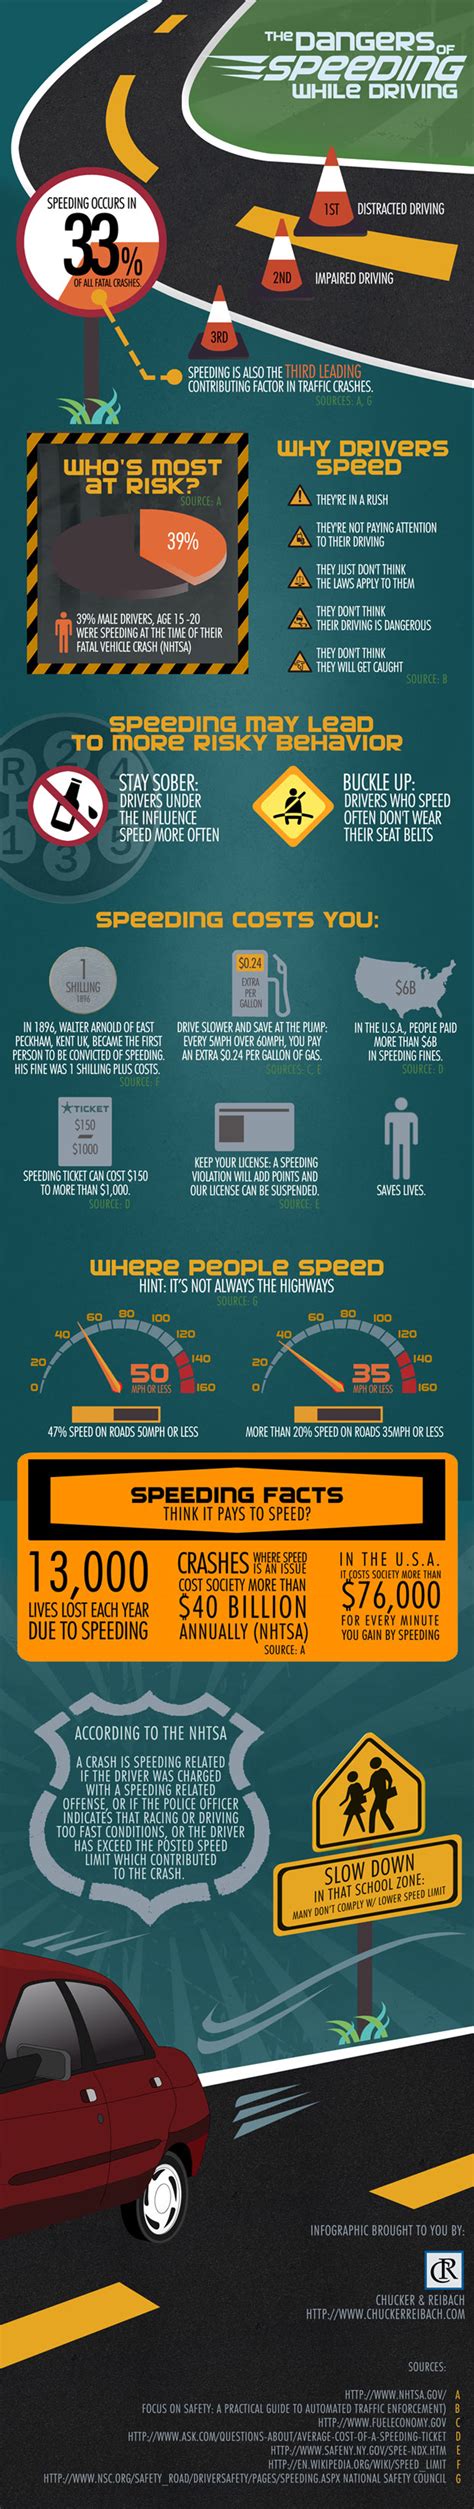 The Dangers Of Speeding While Driving Infographic Infographic List